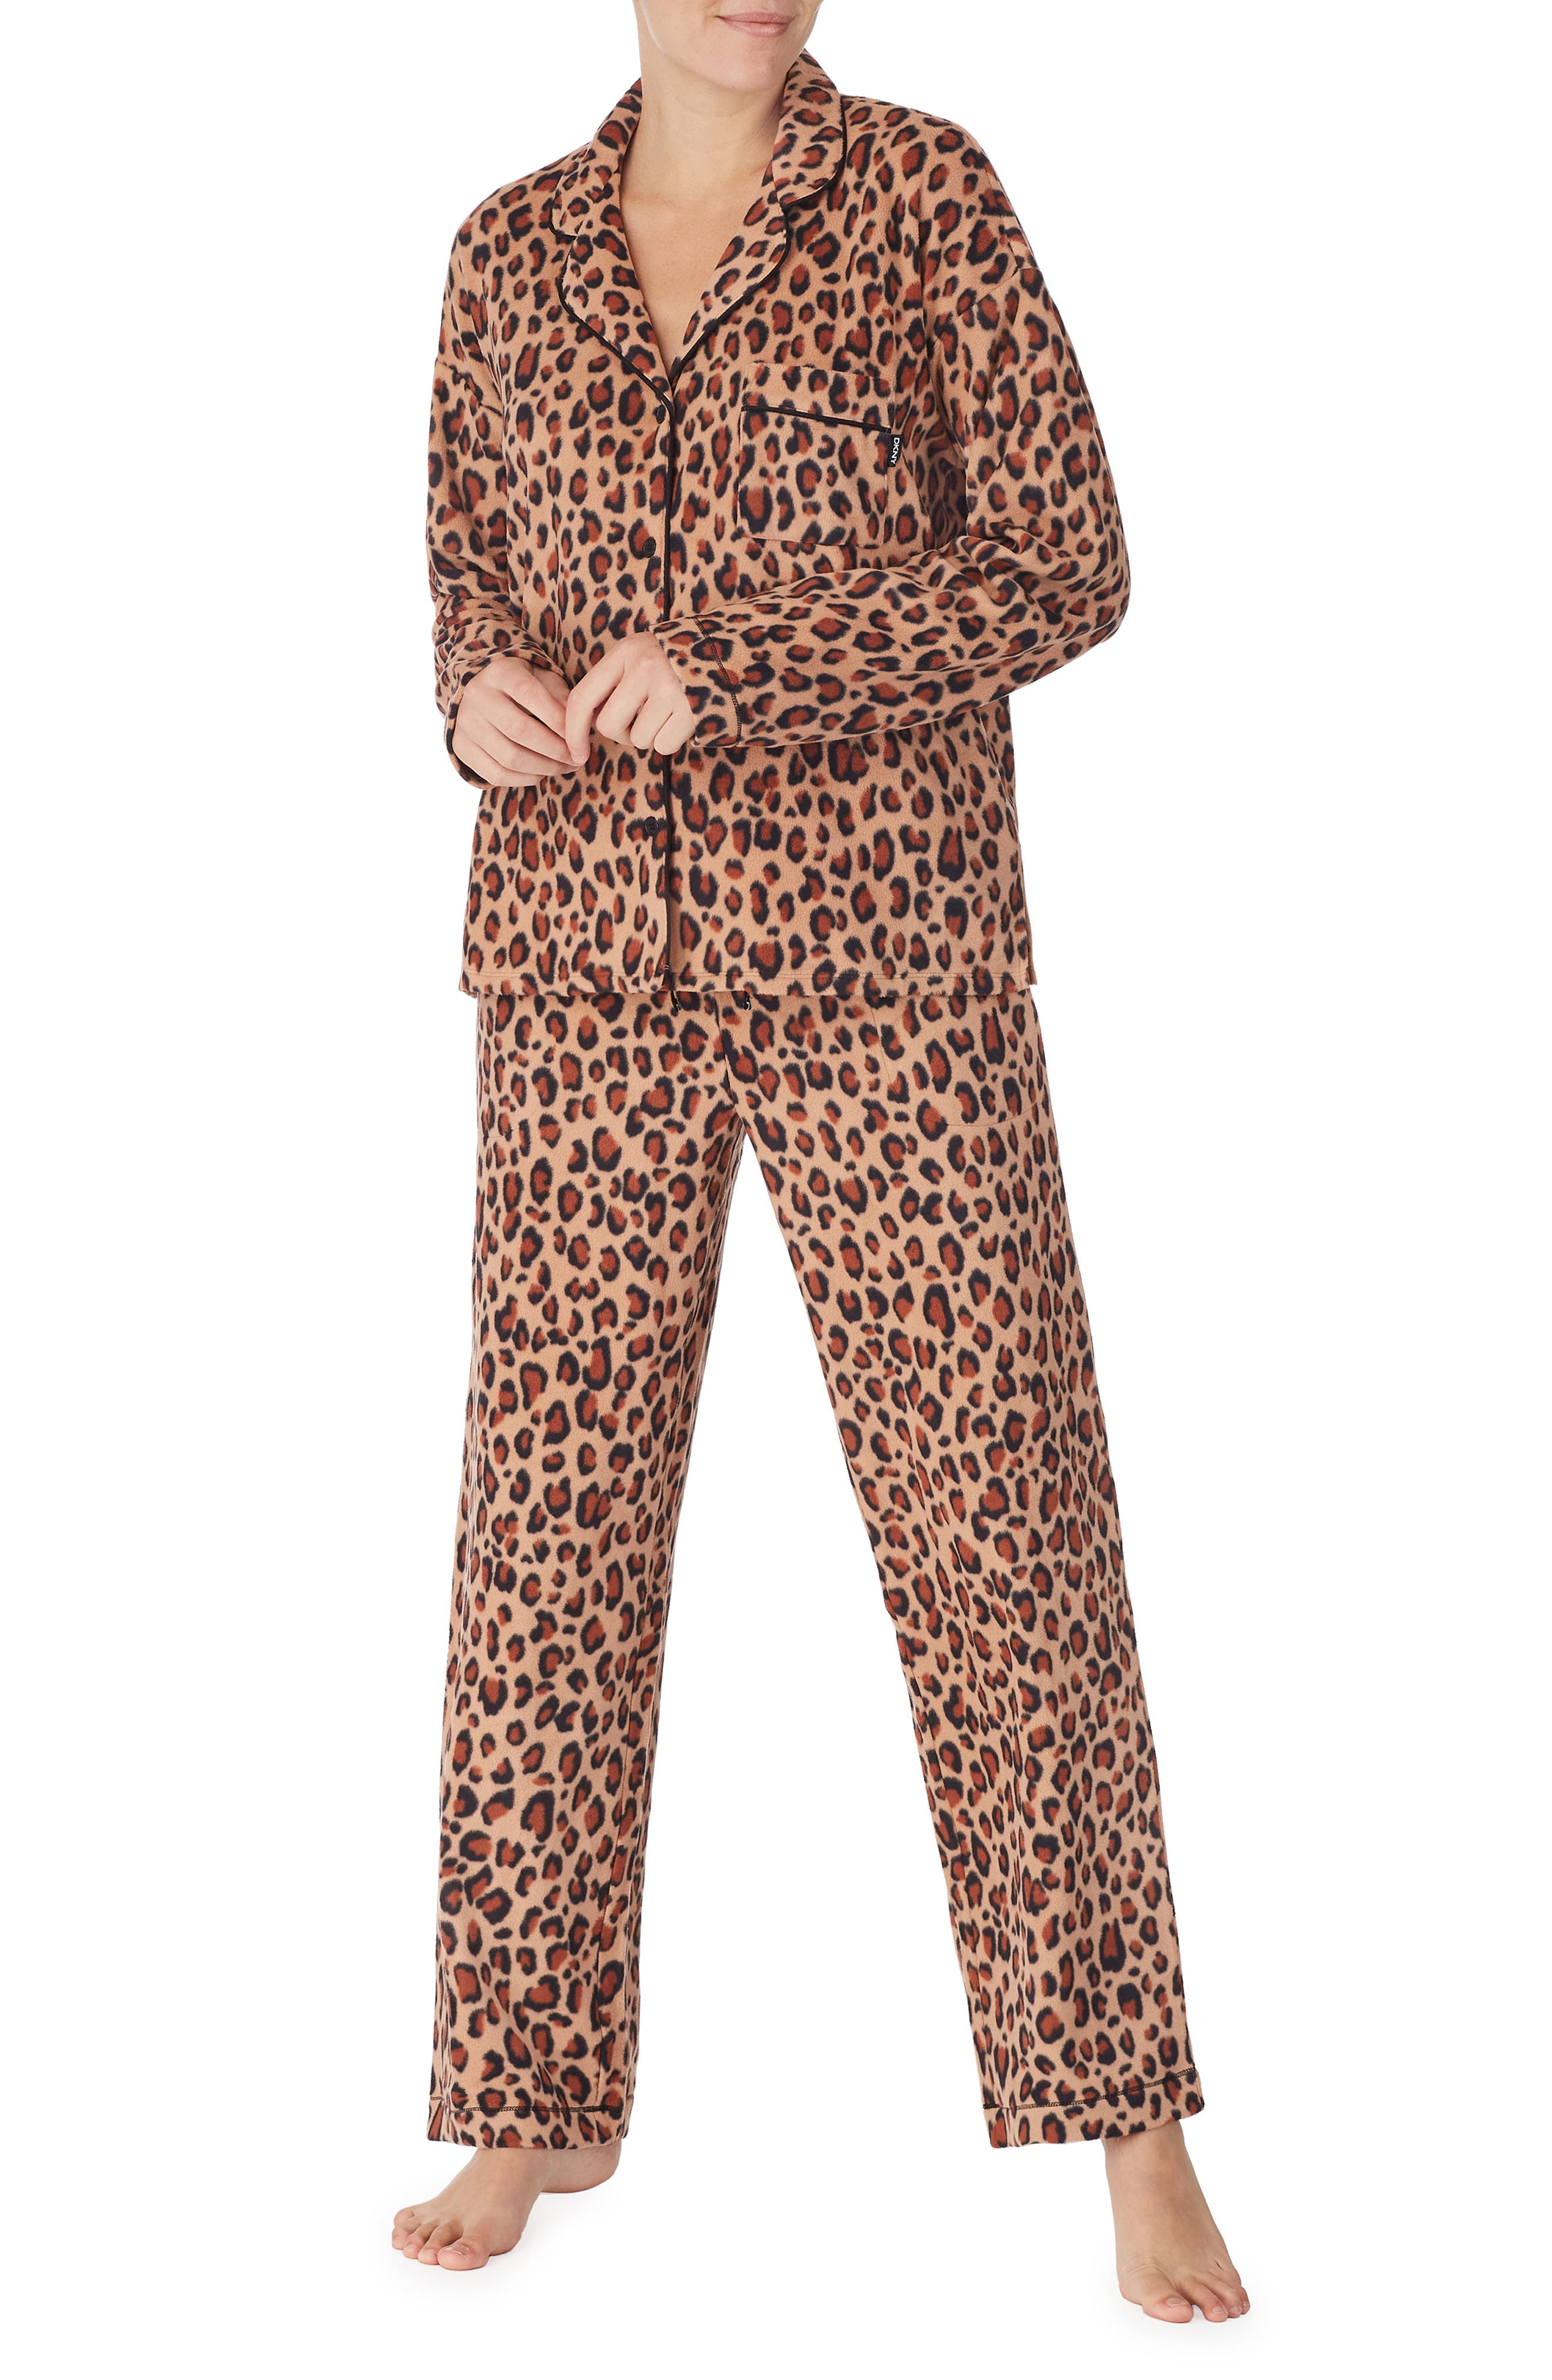 DKNY Pajamas in Brown Animal at Nordstrom, Size Large